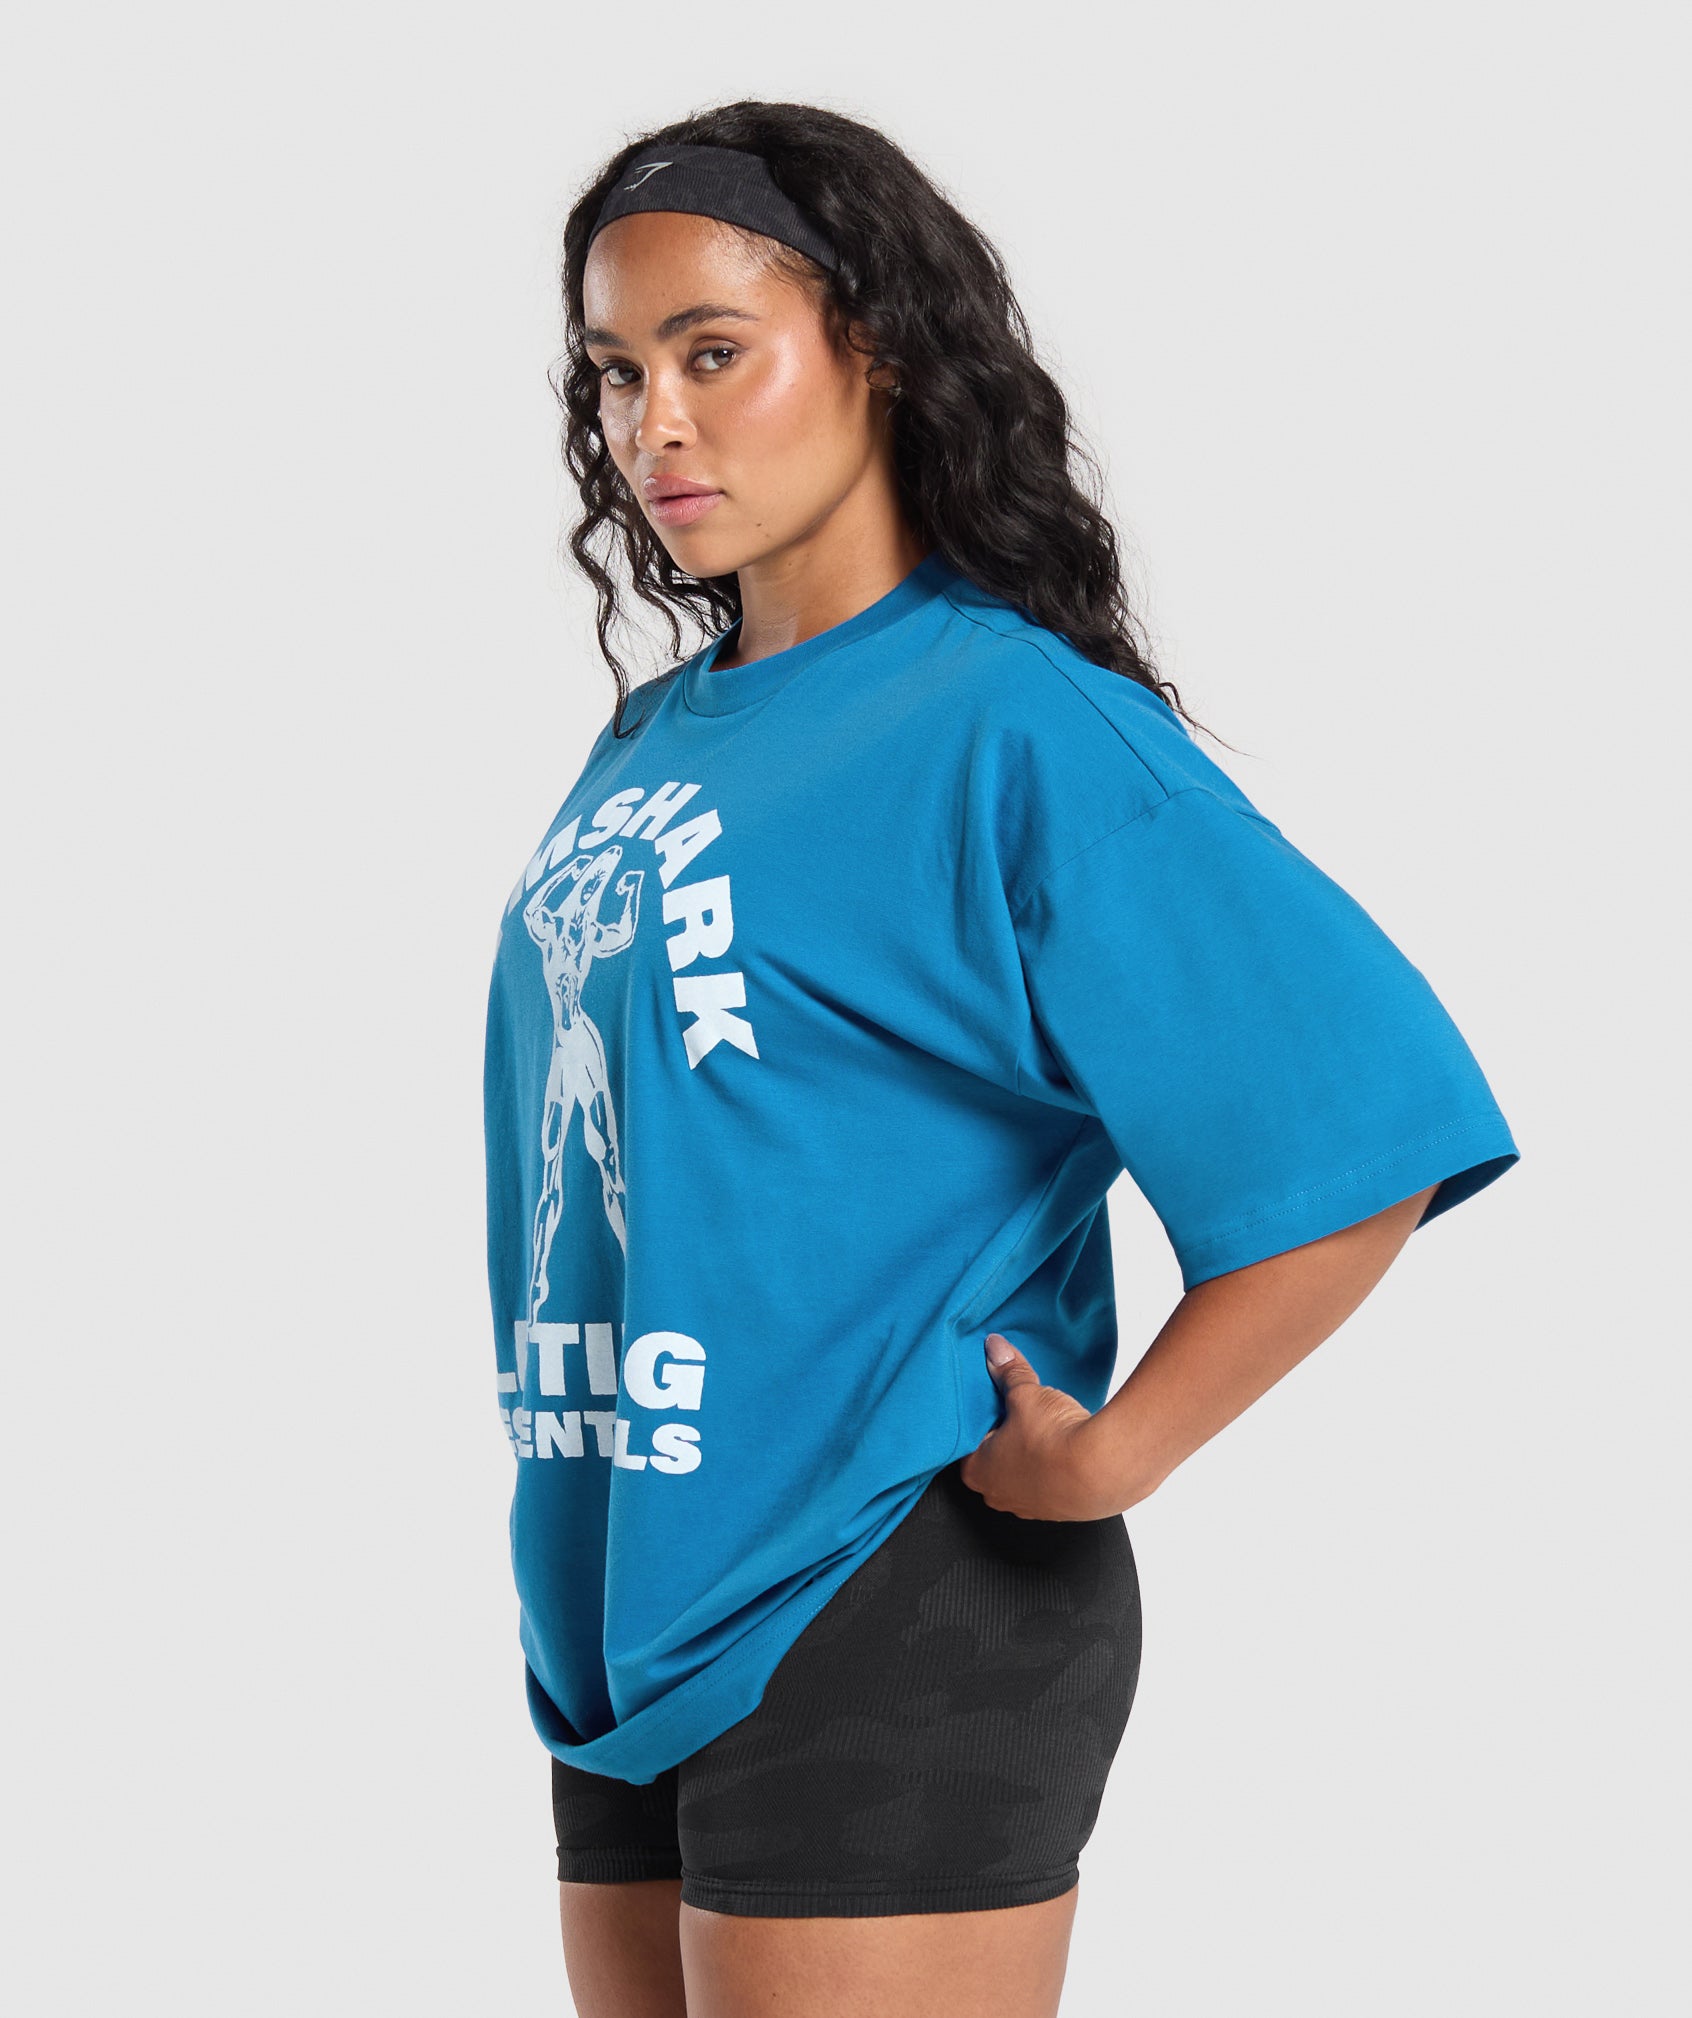 Strong Women Oversized T-Shirt in Retro Blue - view 3